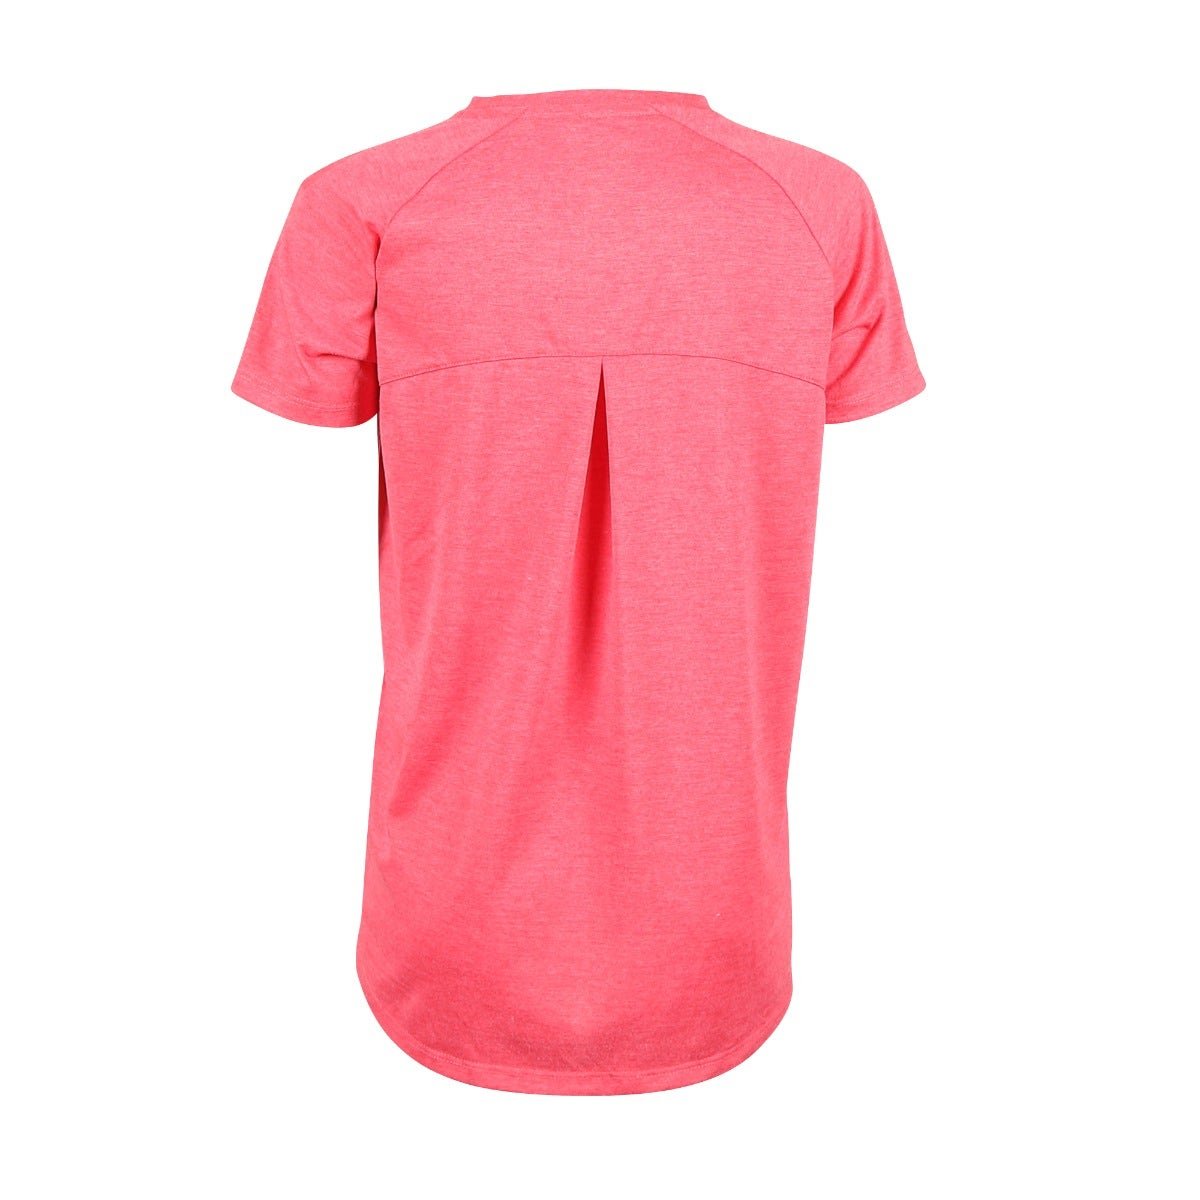 Aubrion SS24 Energise Tech T-Shirt - Young Rider - Coral - 7/8 Years